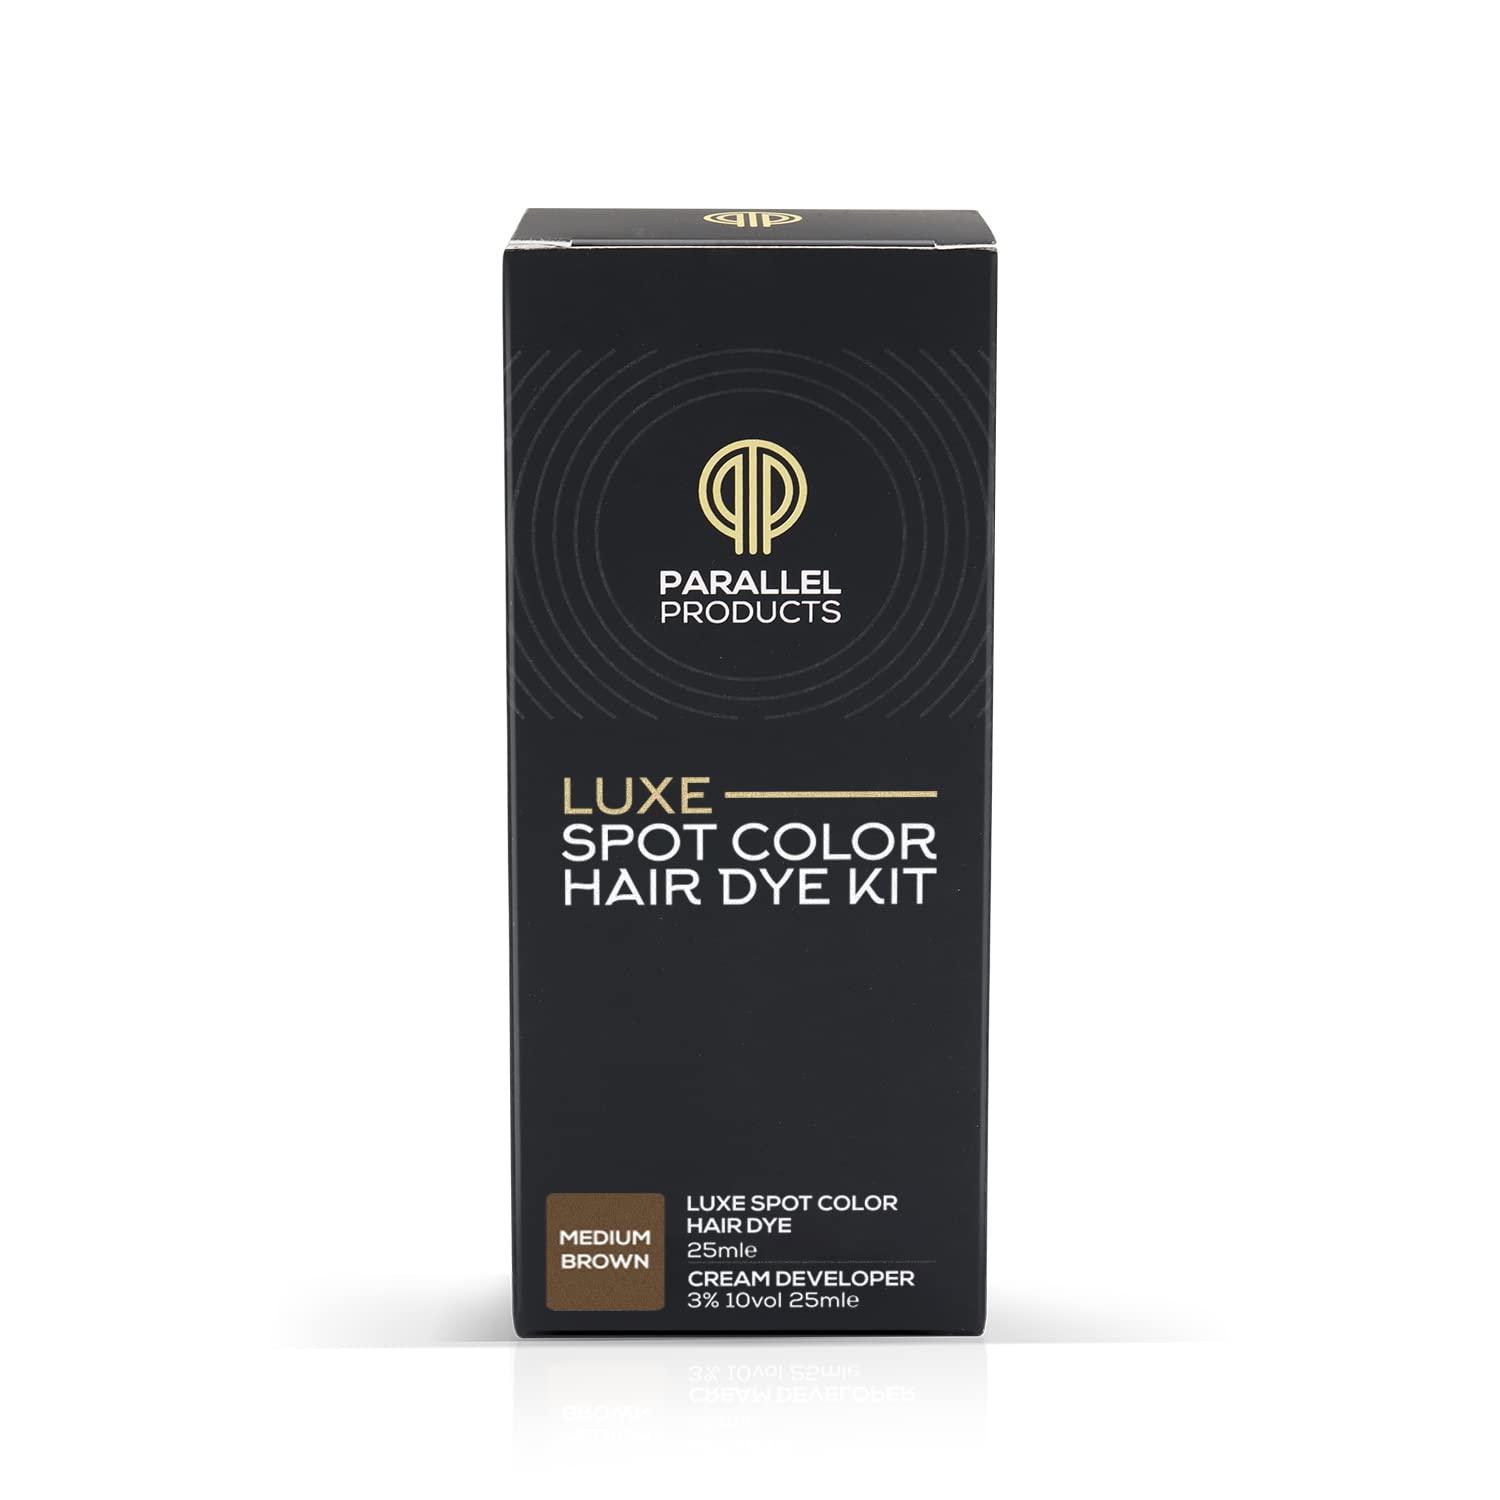  Parallel Products - Luxe Color (Medium Brown